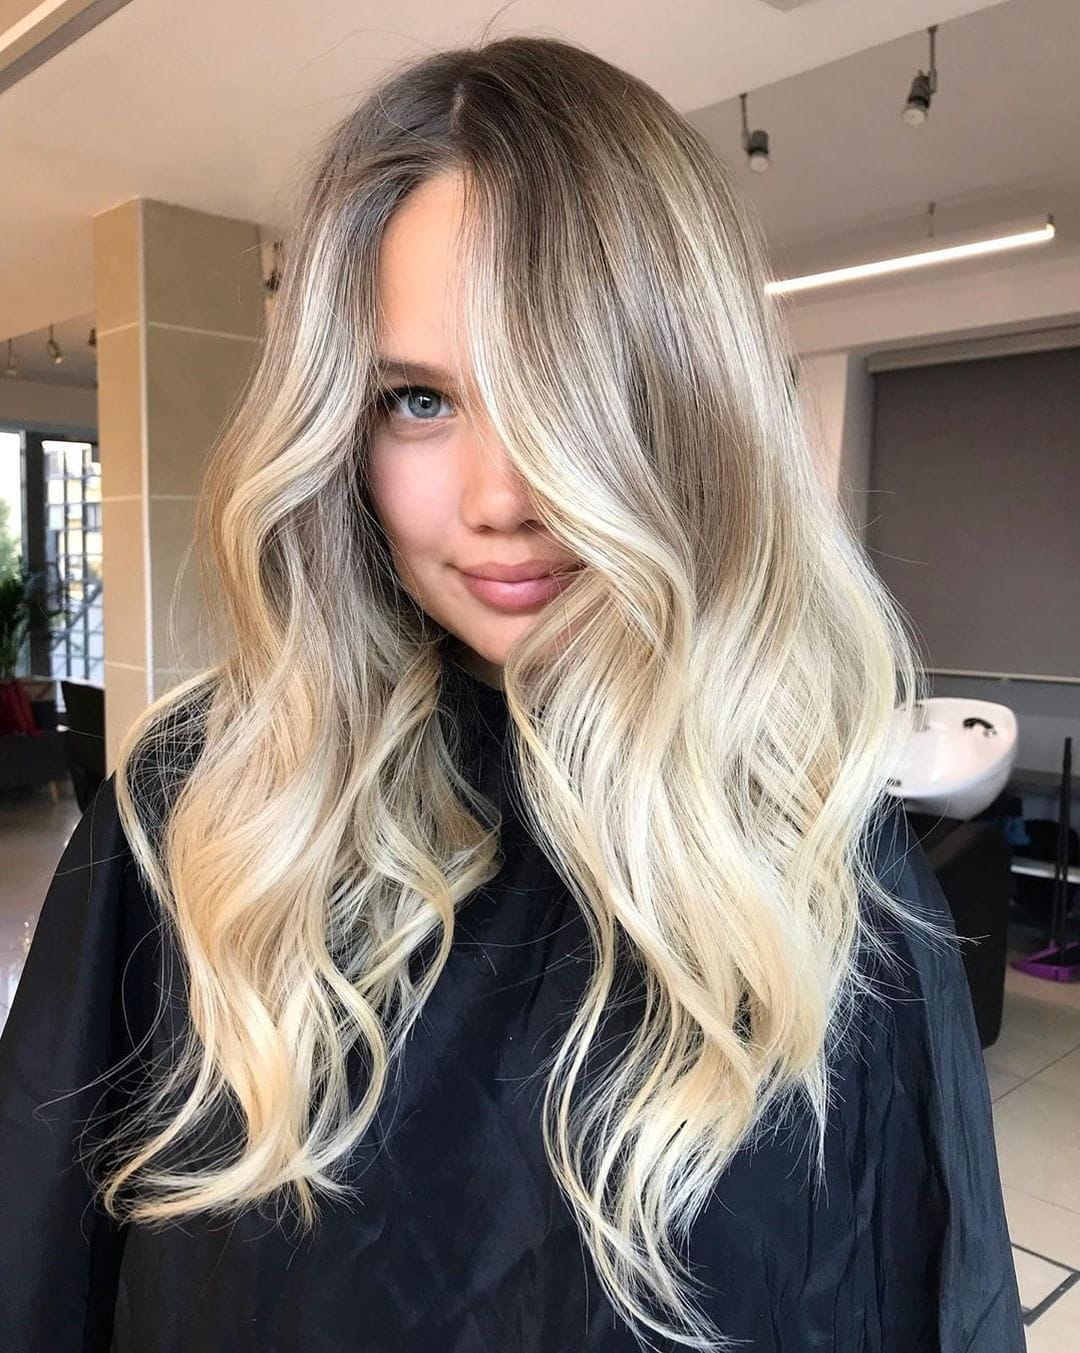 100+ Hairstyle And Hair Colors For Winter That Are Trending images 23